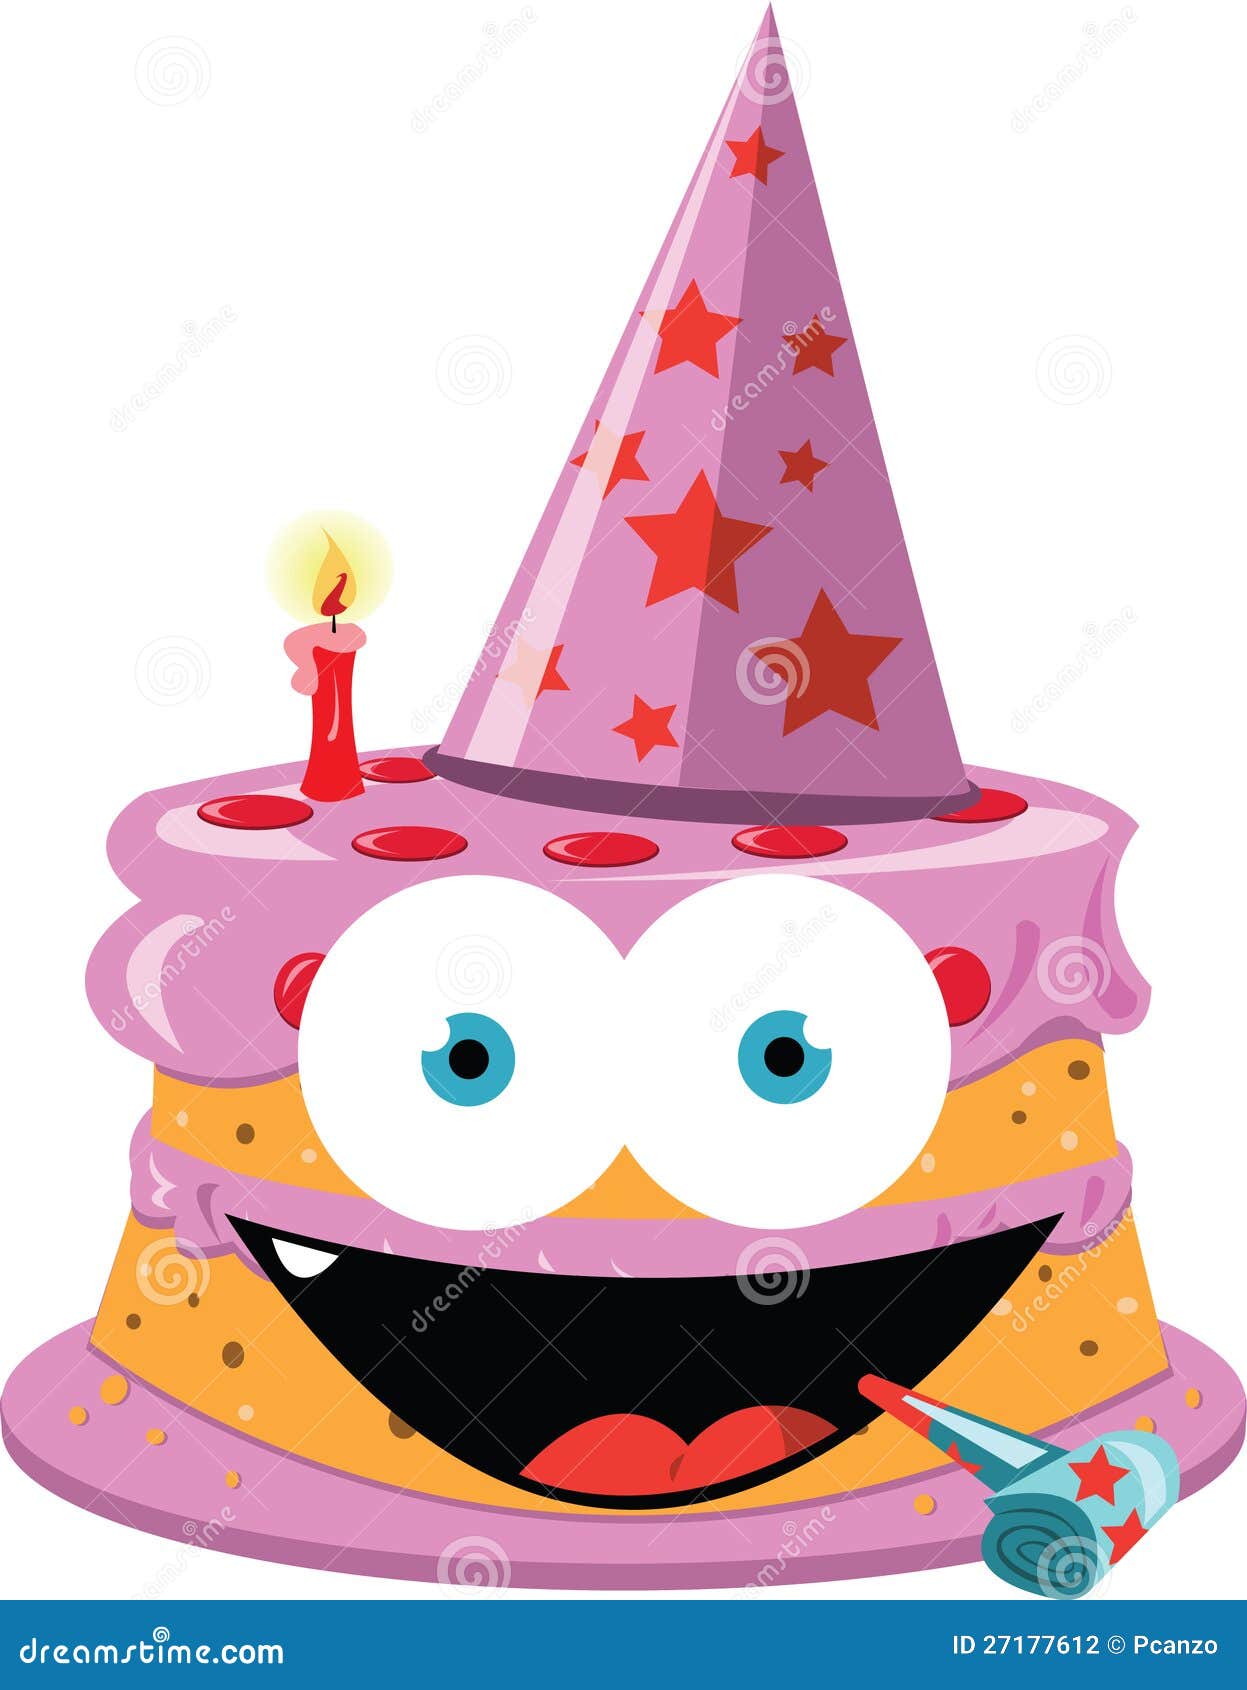 Funny Cake - Girly Version stock vector. Illustration of cute ...